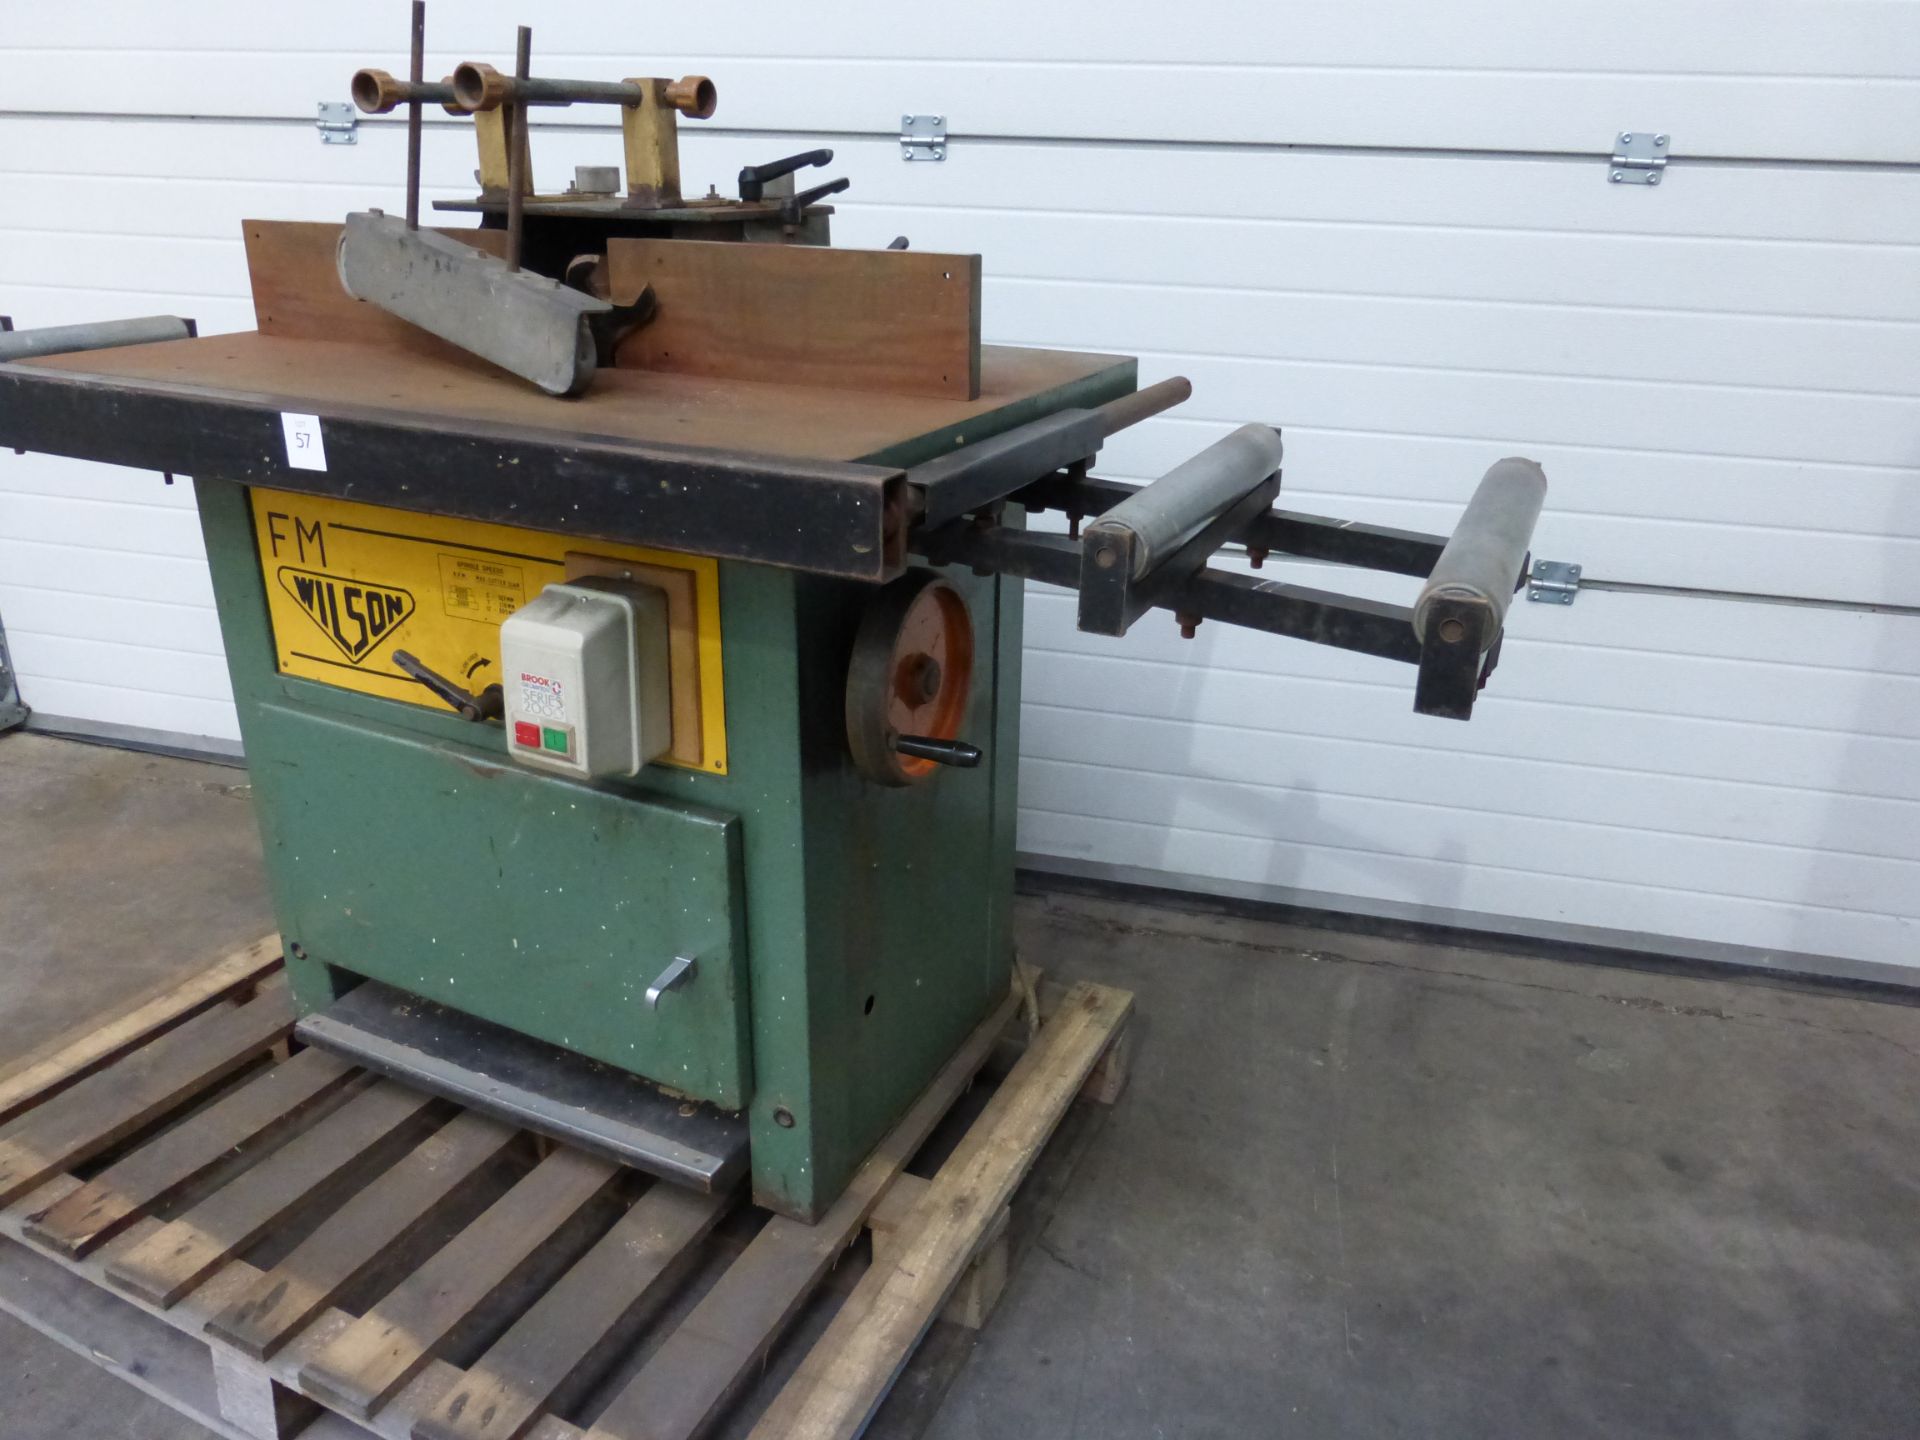 * Wilson FM Spindle Moulder c/w infeed and outfeed extensions and pull out support rail. 3PH. - Image 5 of 6